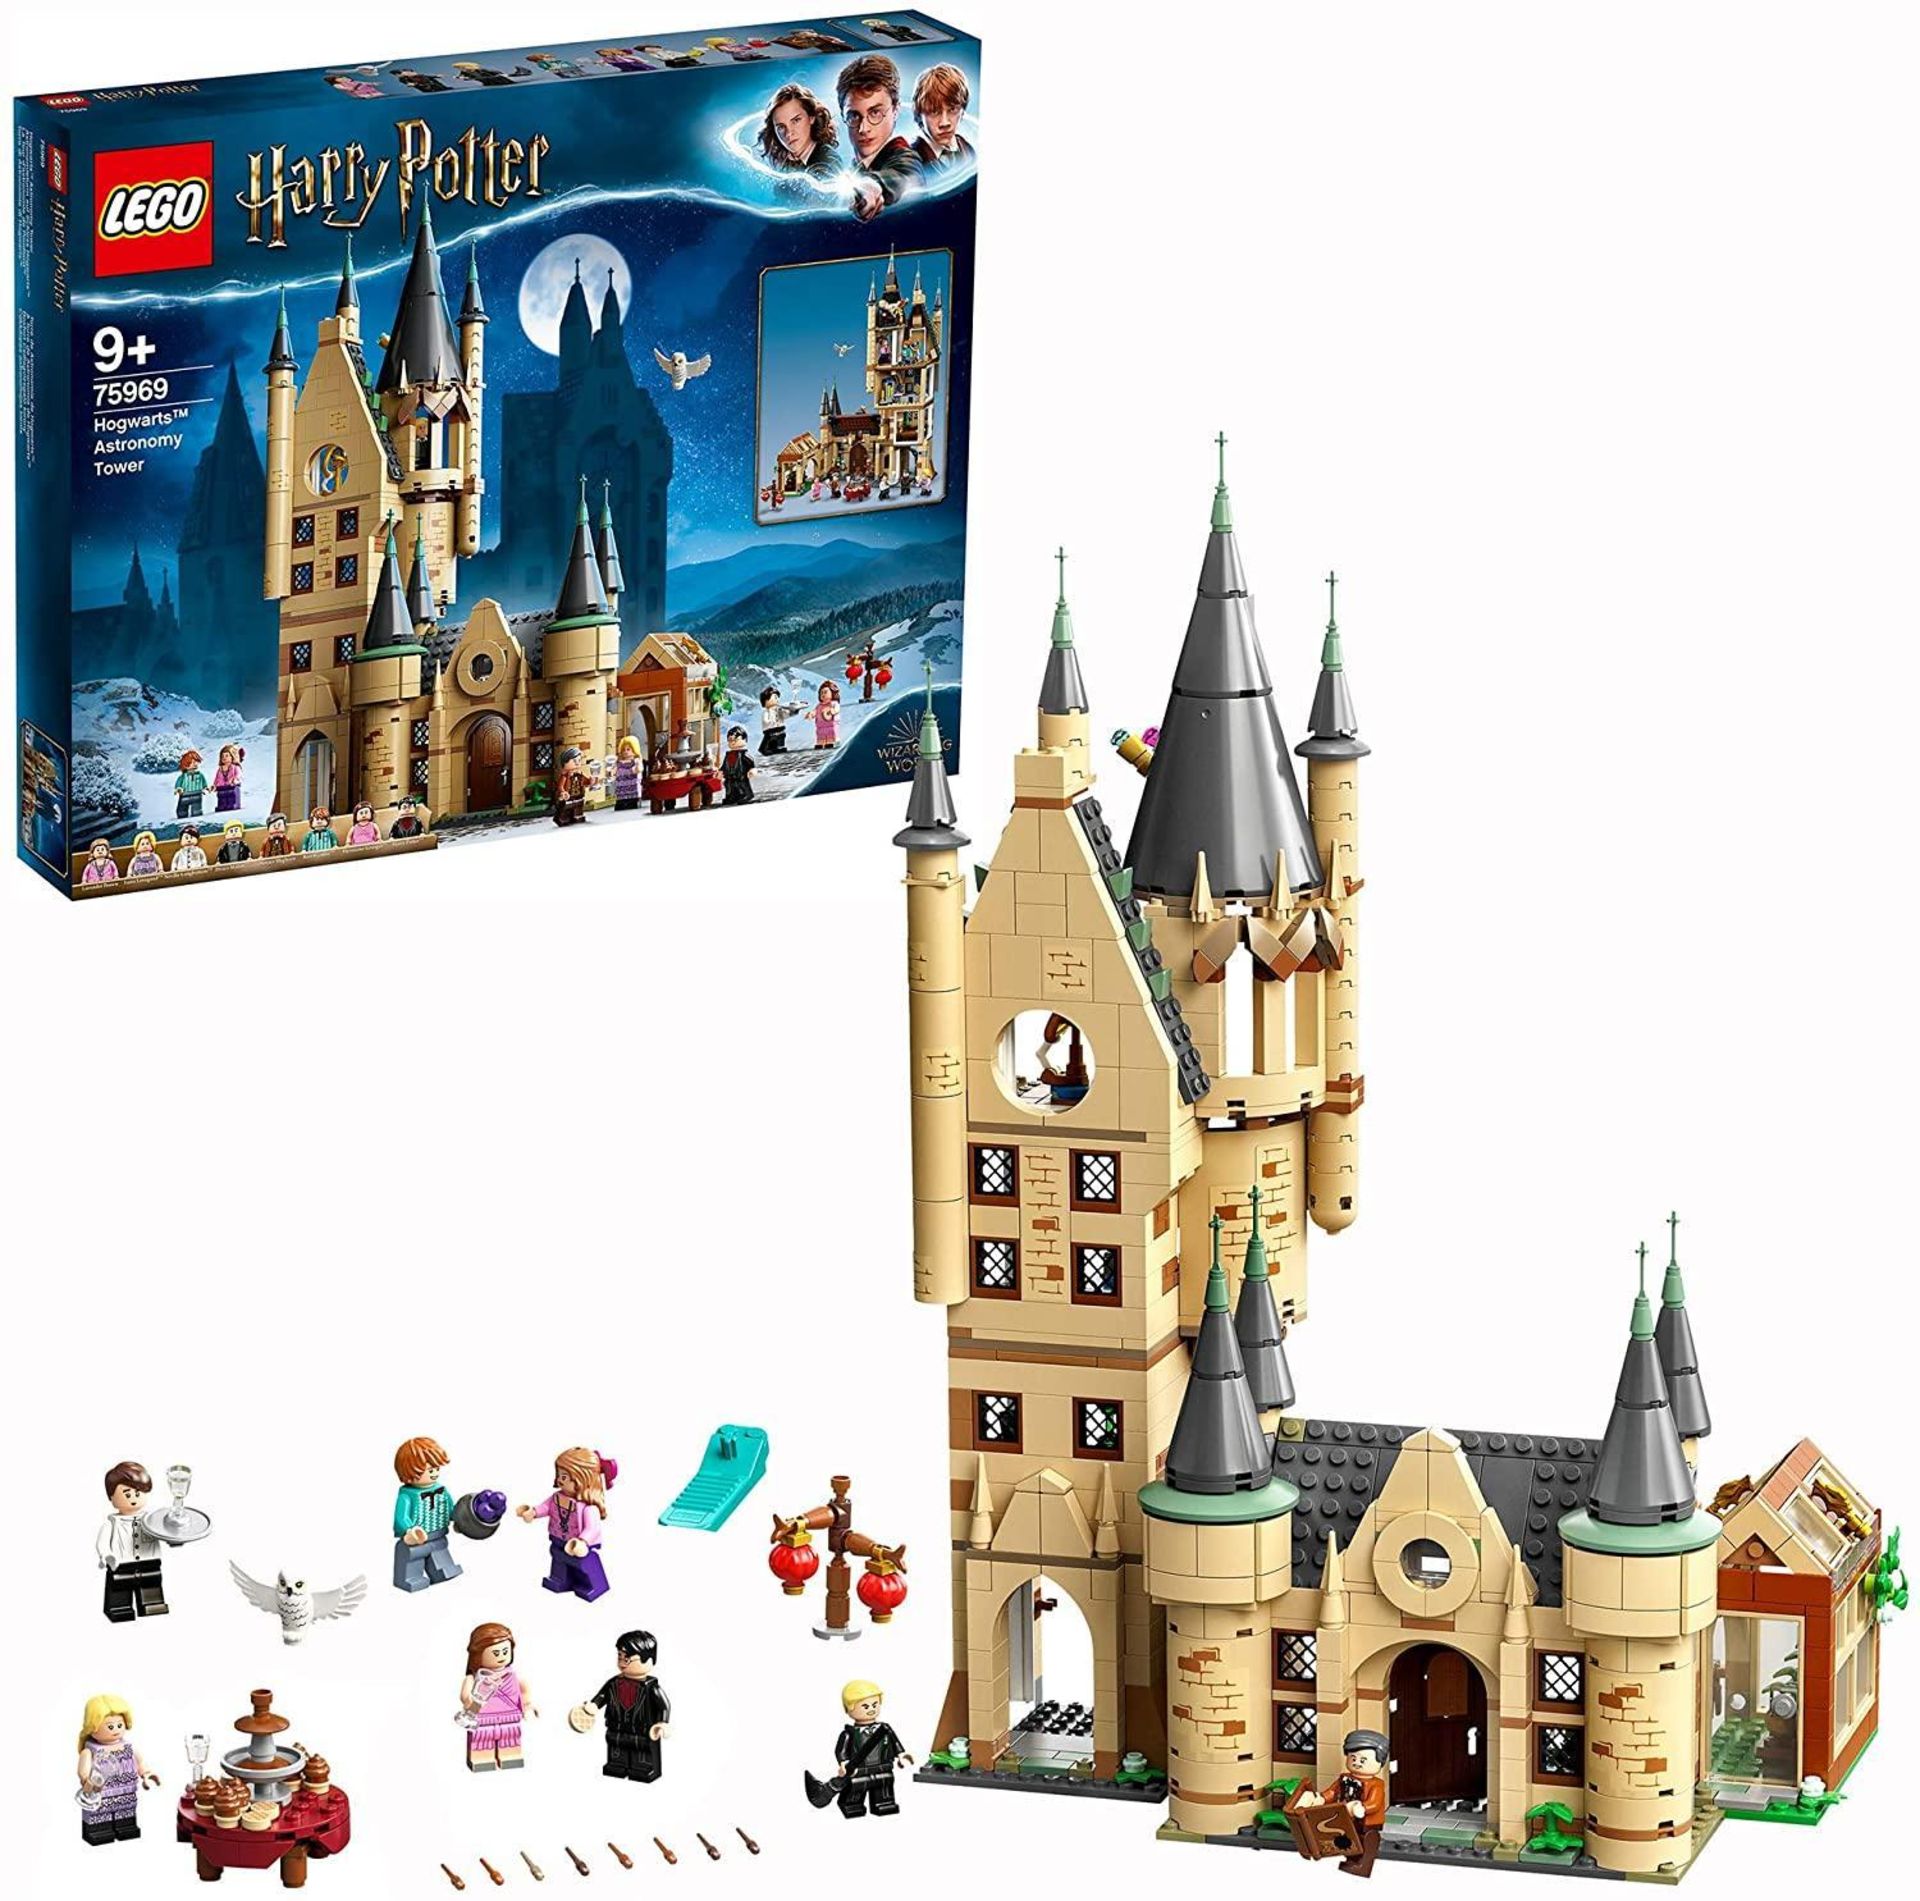 Lego 75969 Harry Potter Hogwarts Castle Astronomy Tower Toy Compatible with Great Hall and Whomping